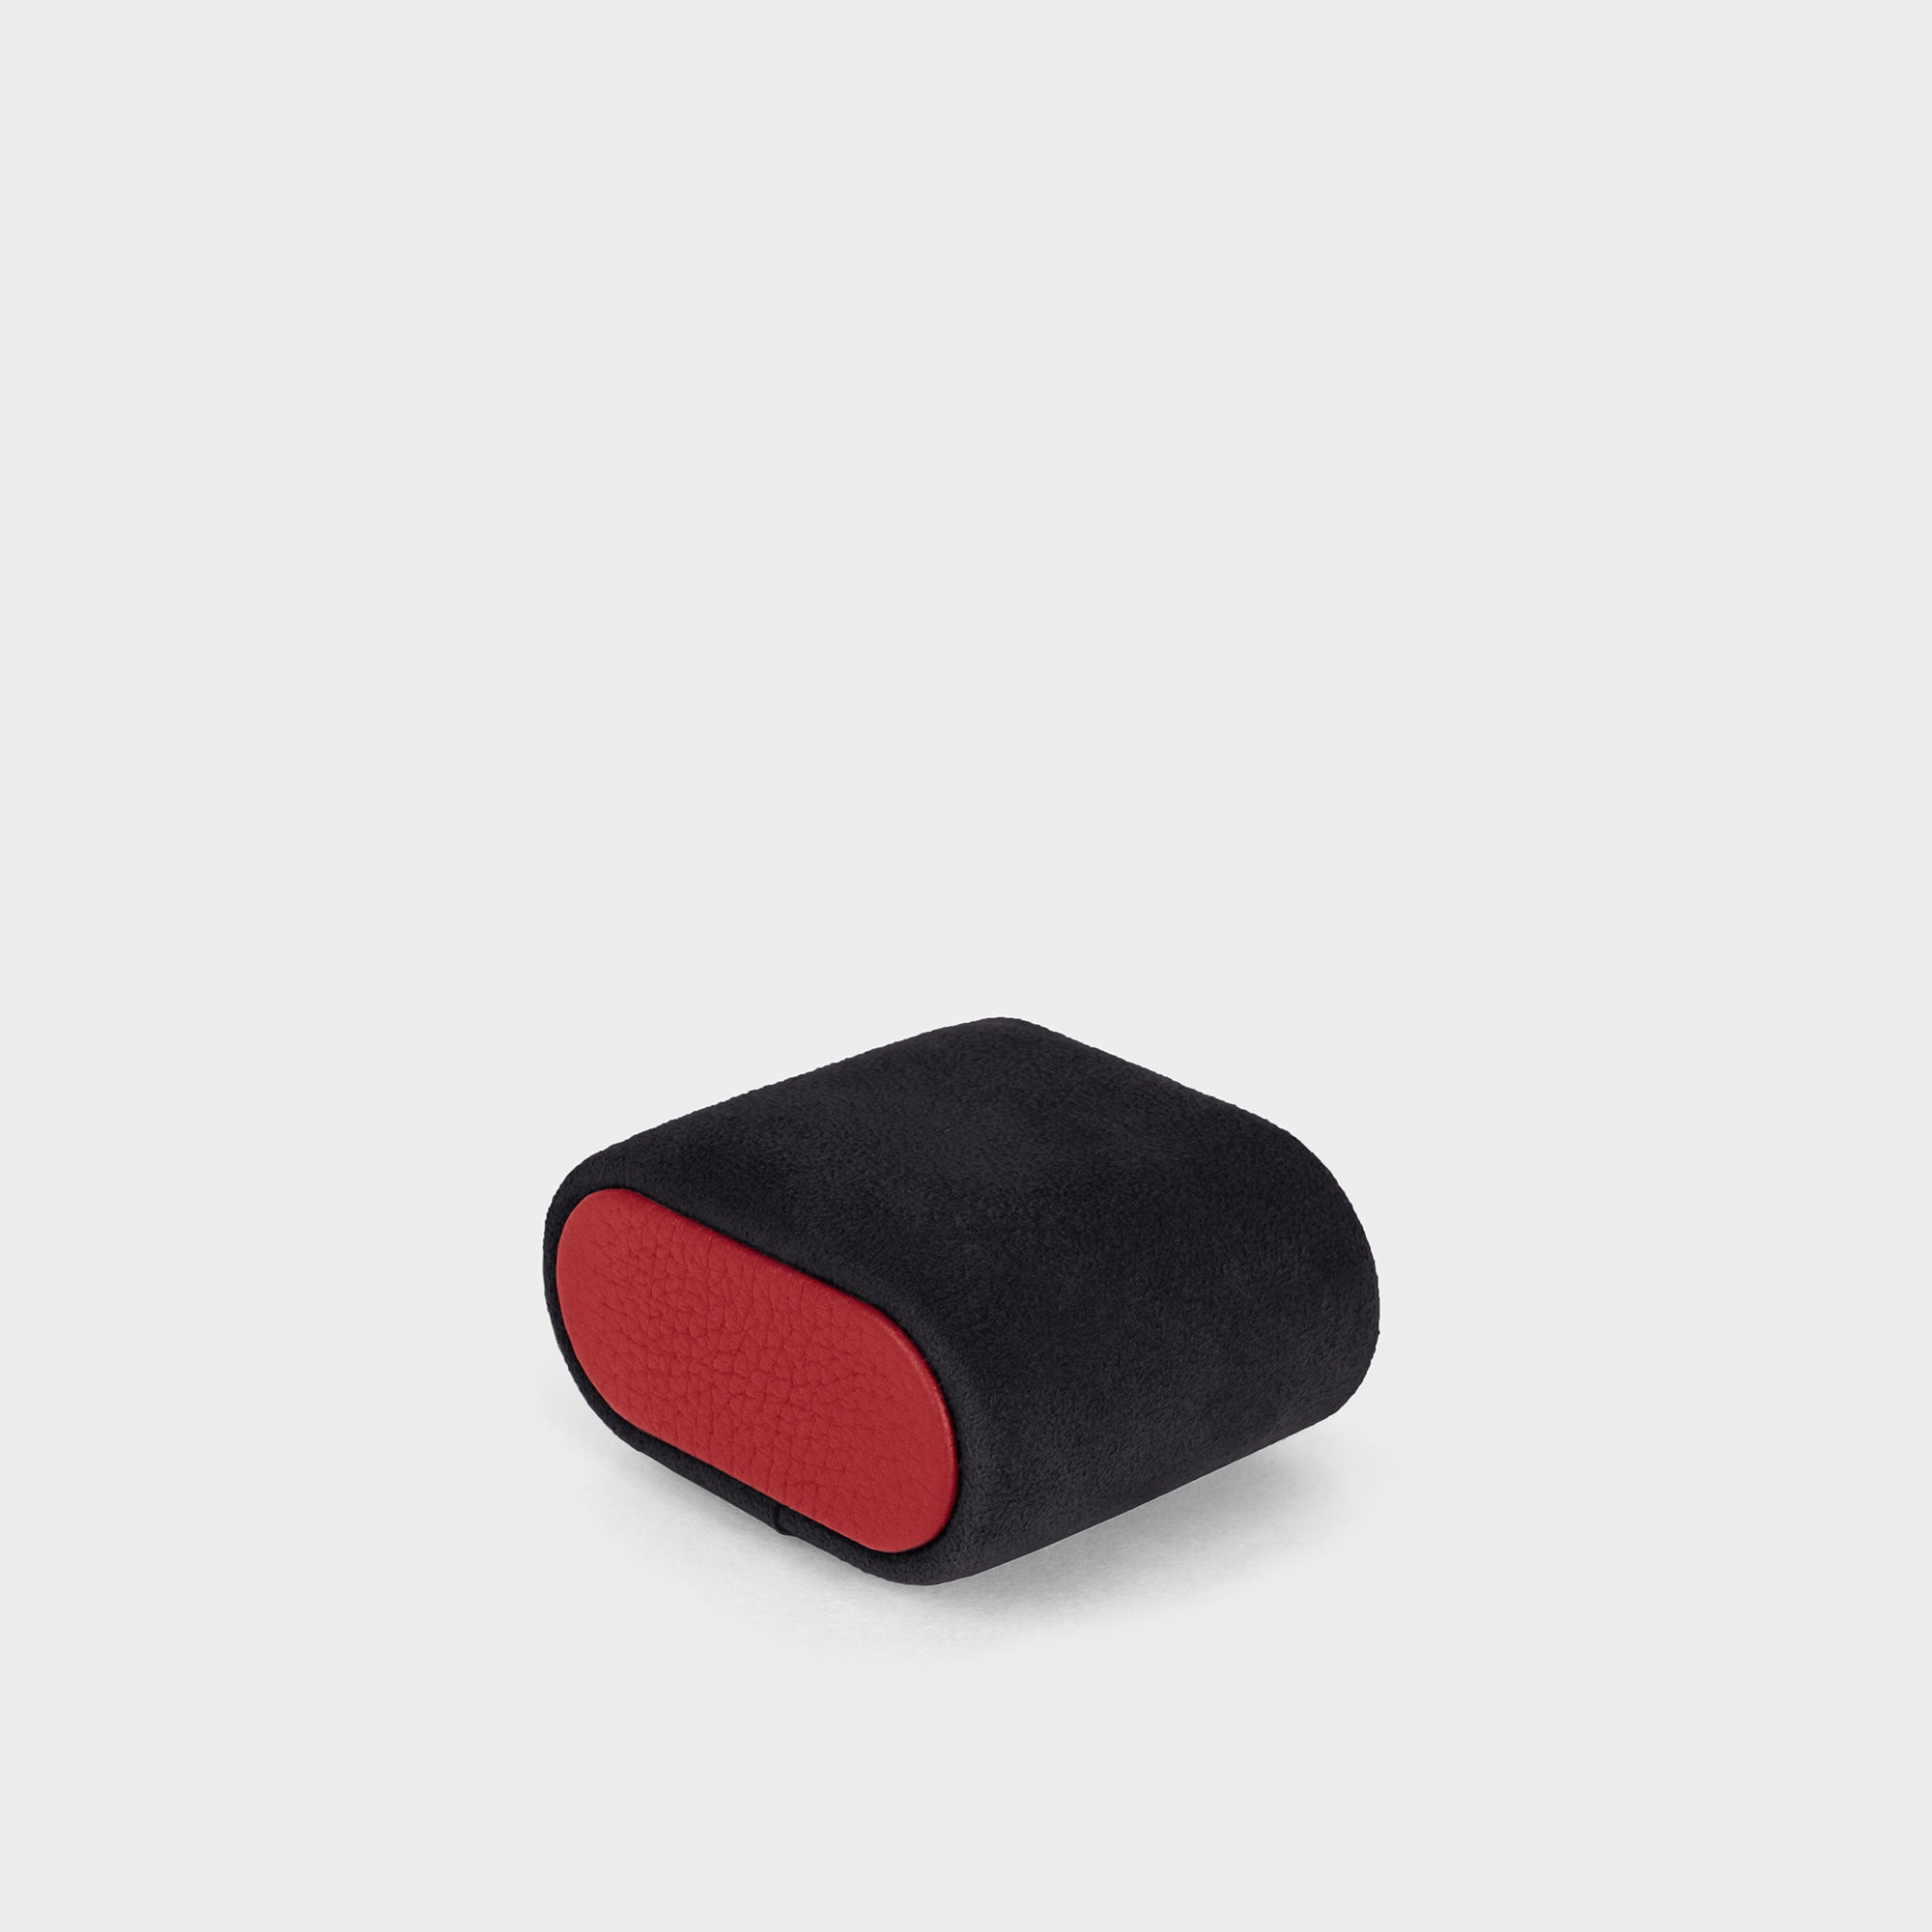 Removable Alcantara watch cushion in Notte with contrasting red leather side accents